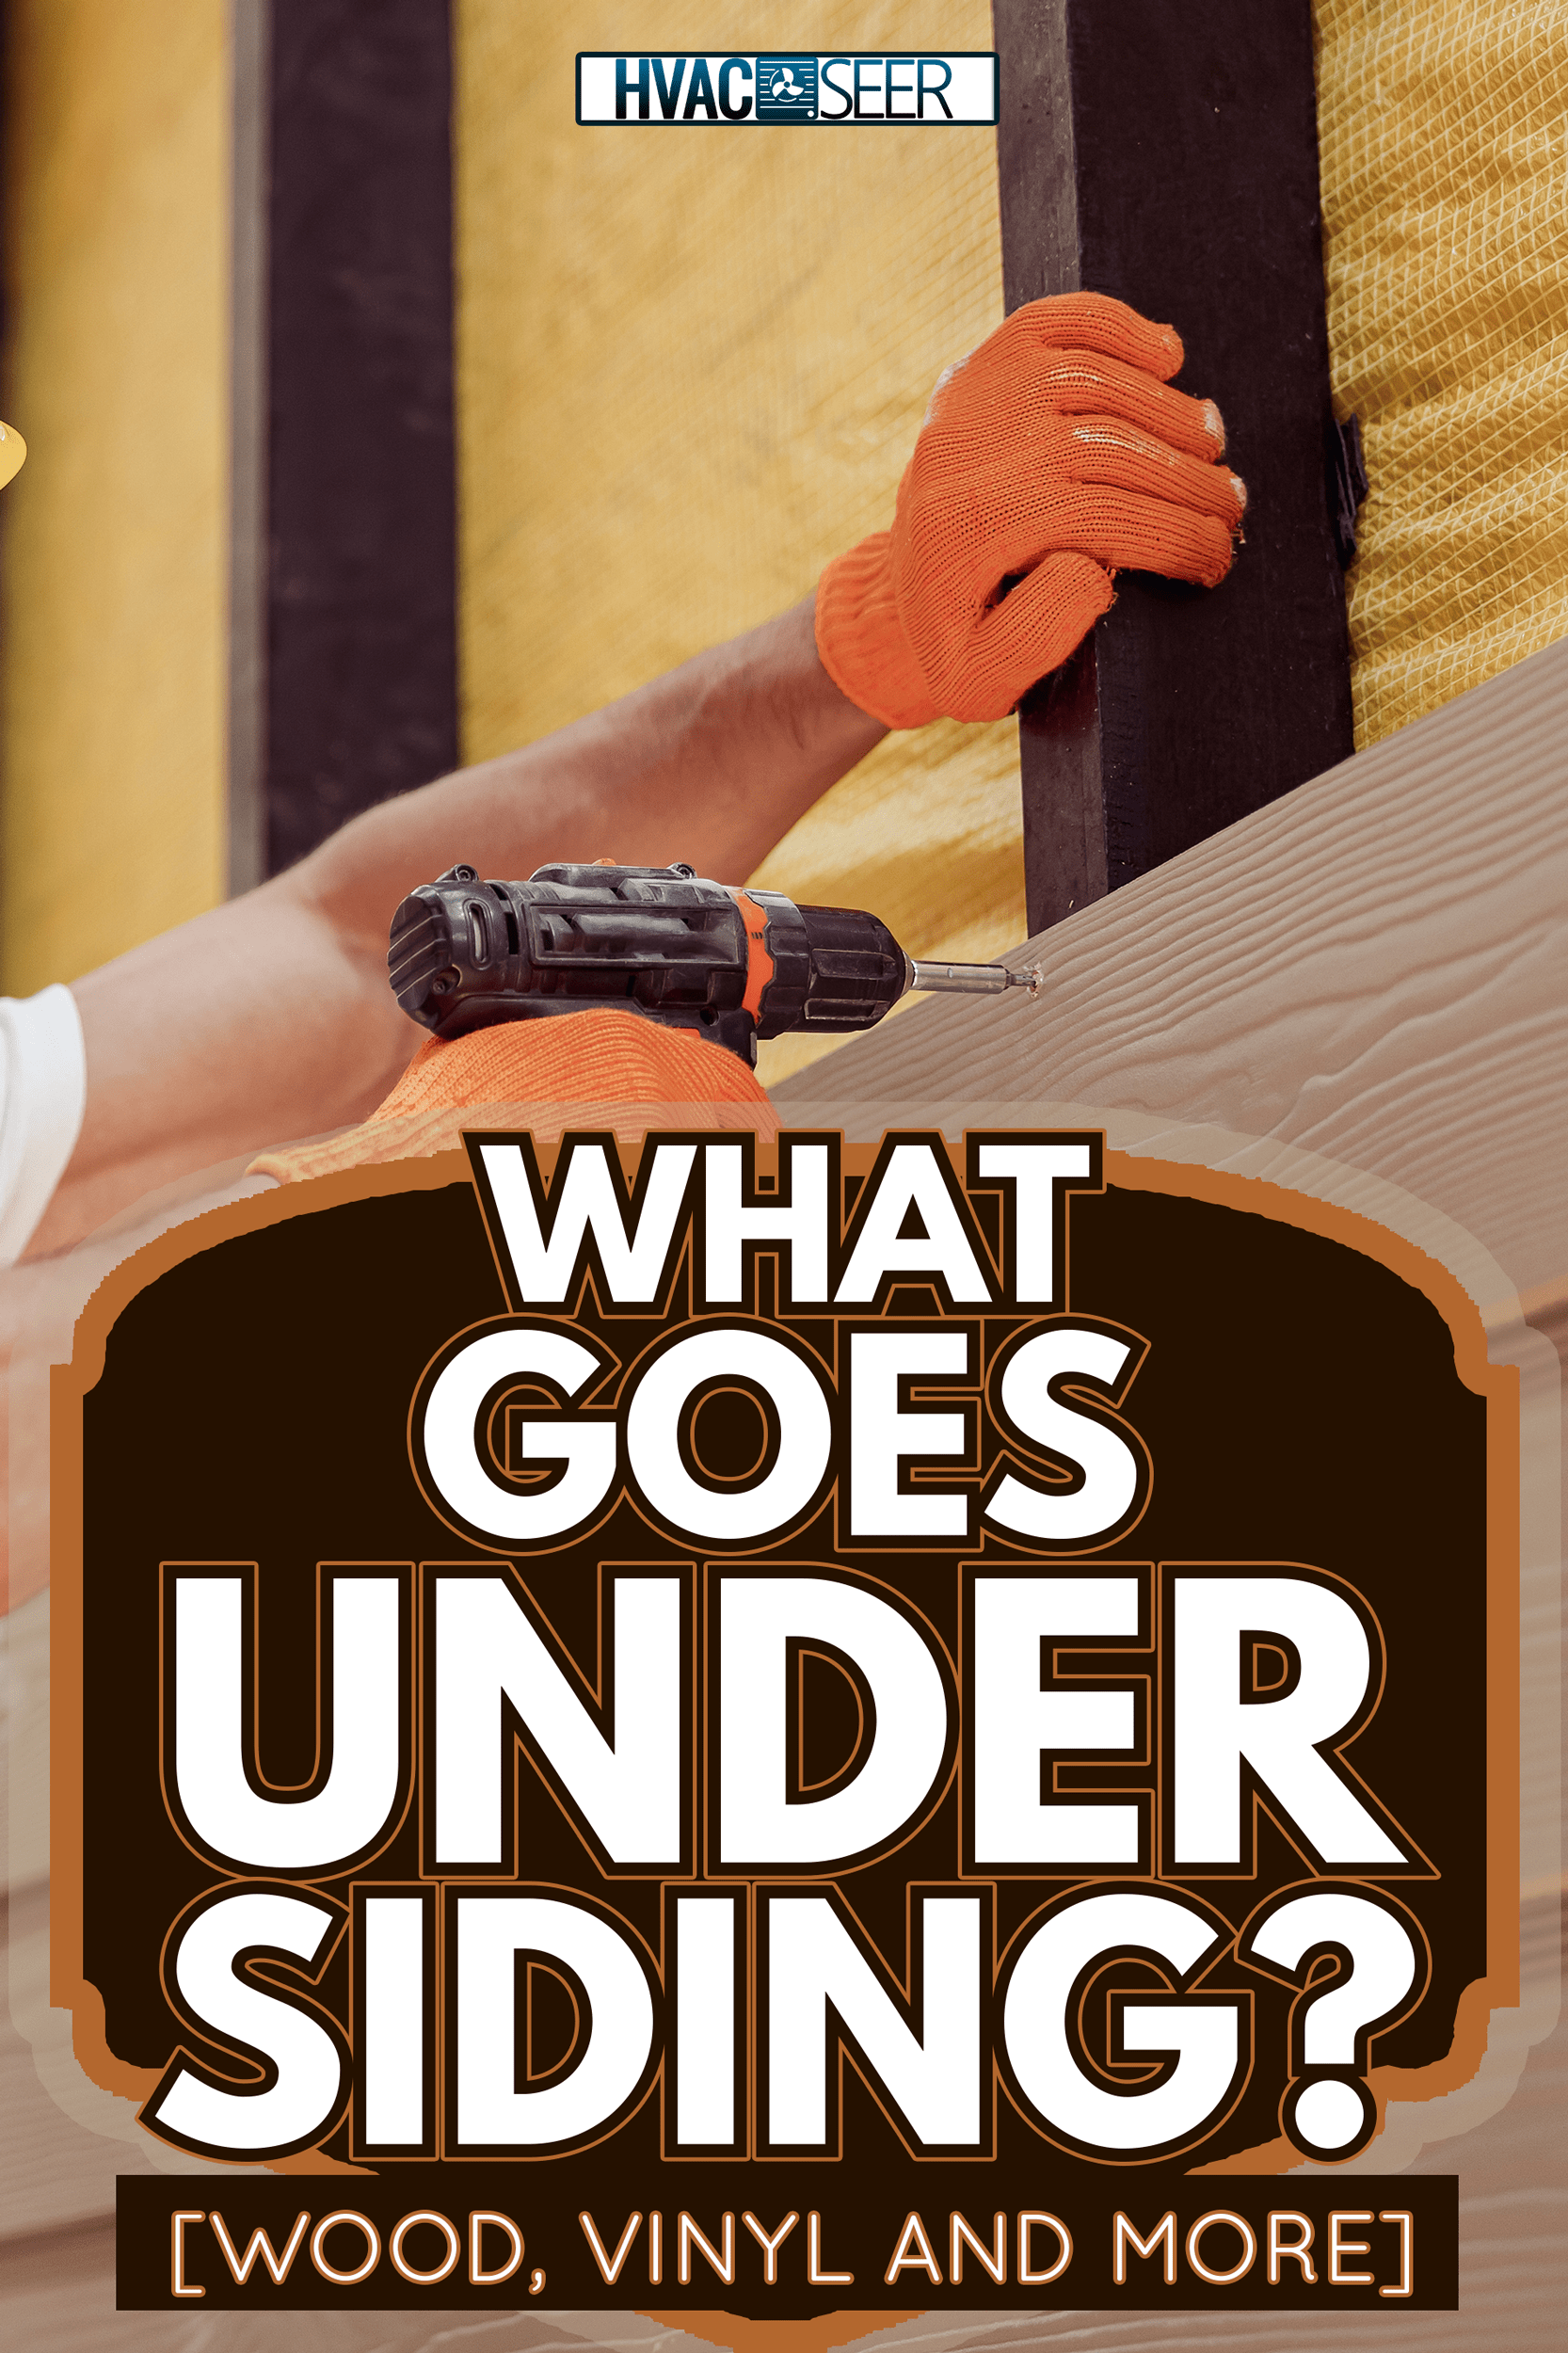 Handsome young man construction worker wearing safety helmet and work gloves while installing exterior wood siding - What Goes Under Siding [Wood, Vinyl And More]